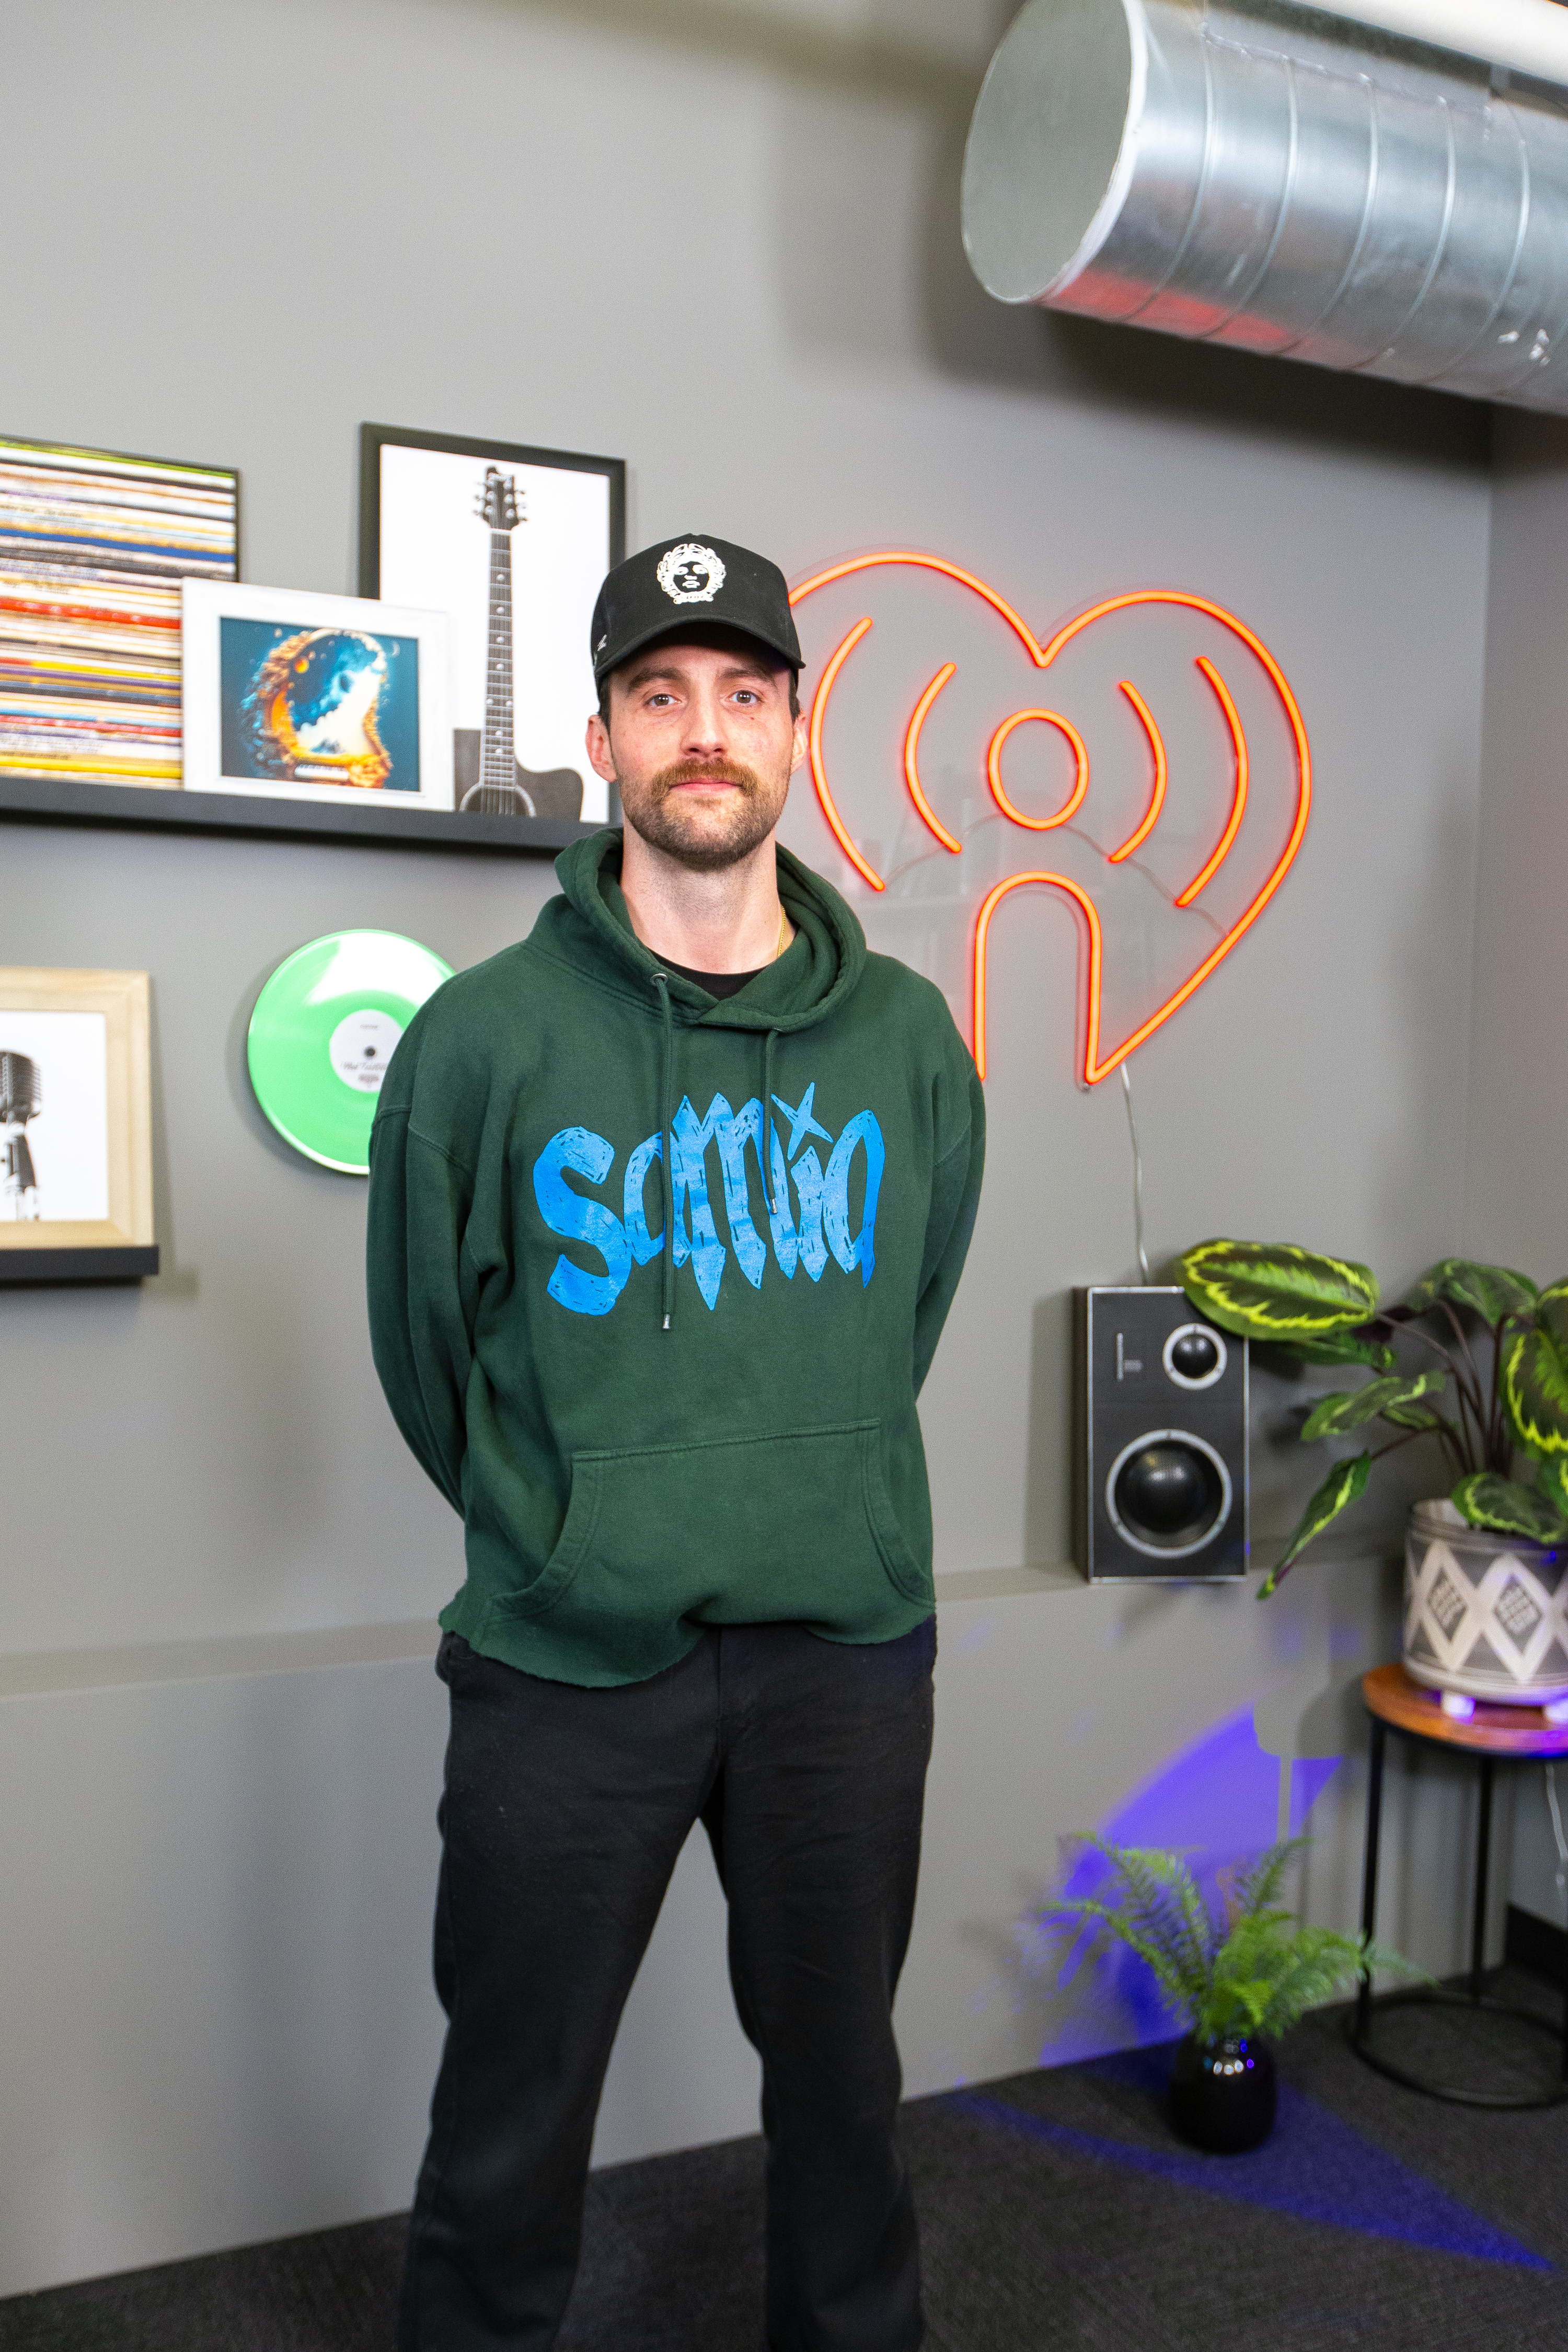 Ruston Kelly on 'Too Chill to Kill' His Bus Catching Fire, Weakness, et cetera, Recording in Hotels